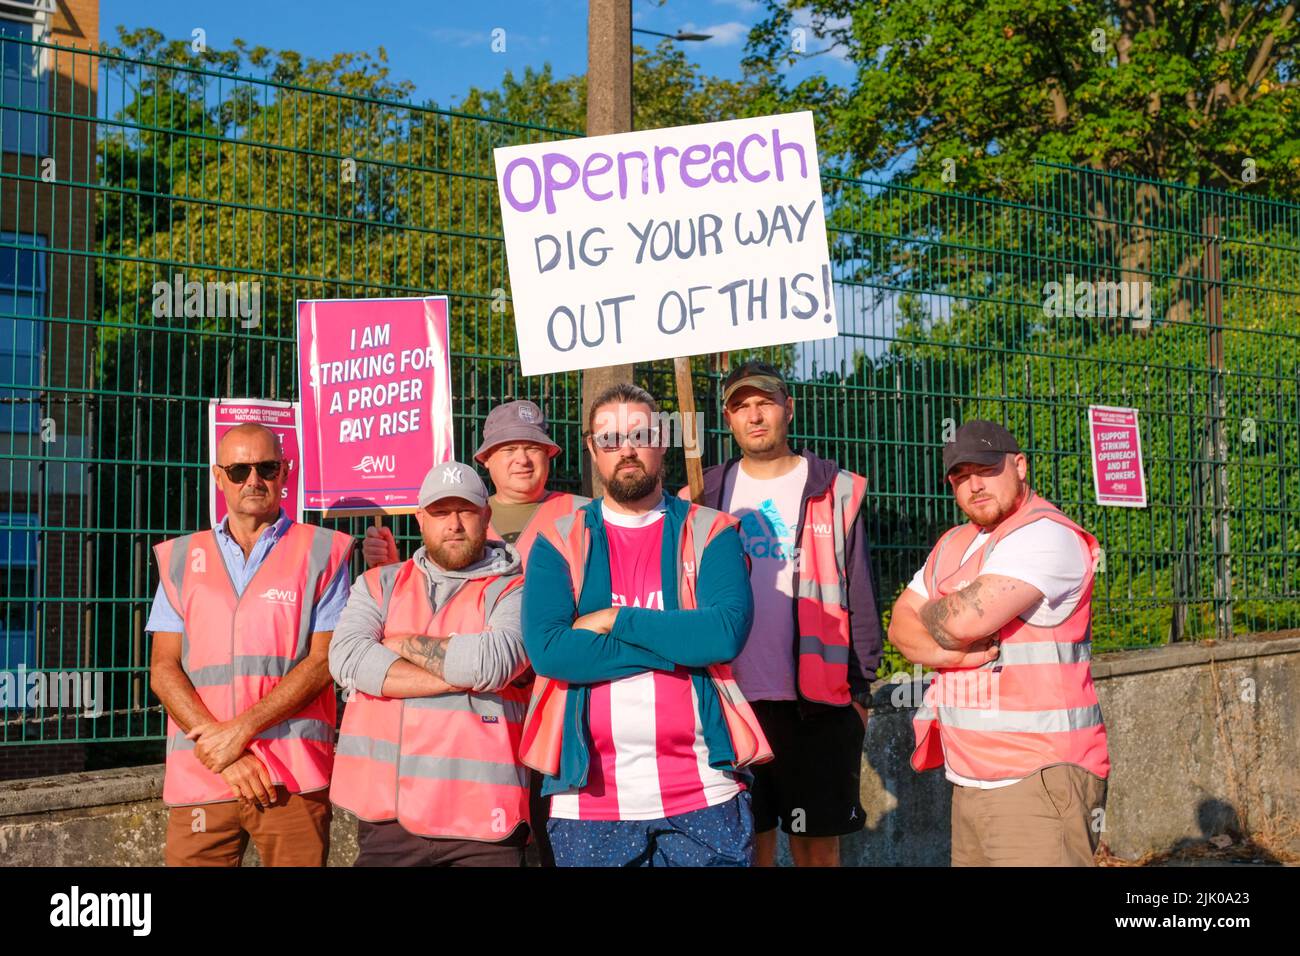 Bristol, UK. 29th July, 2022. BT Openreach engineers who are members of the Communications Workers Union CWU are on strike. Pictured is the picket line outside the BT Openreach centre in Horfield Bristol. Strikers are concerned about a below inflation pay rise. Credit: JMF News/Alamy Live News Stock Photo